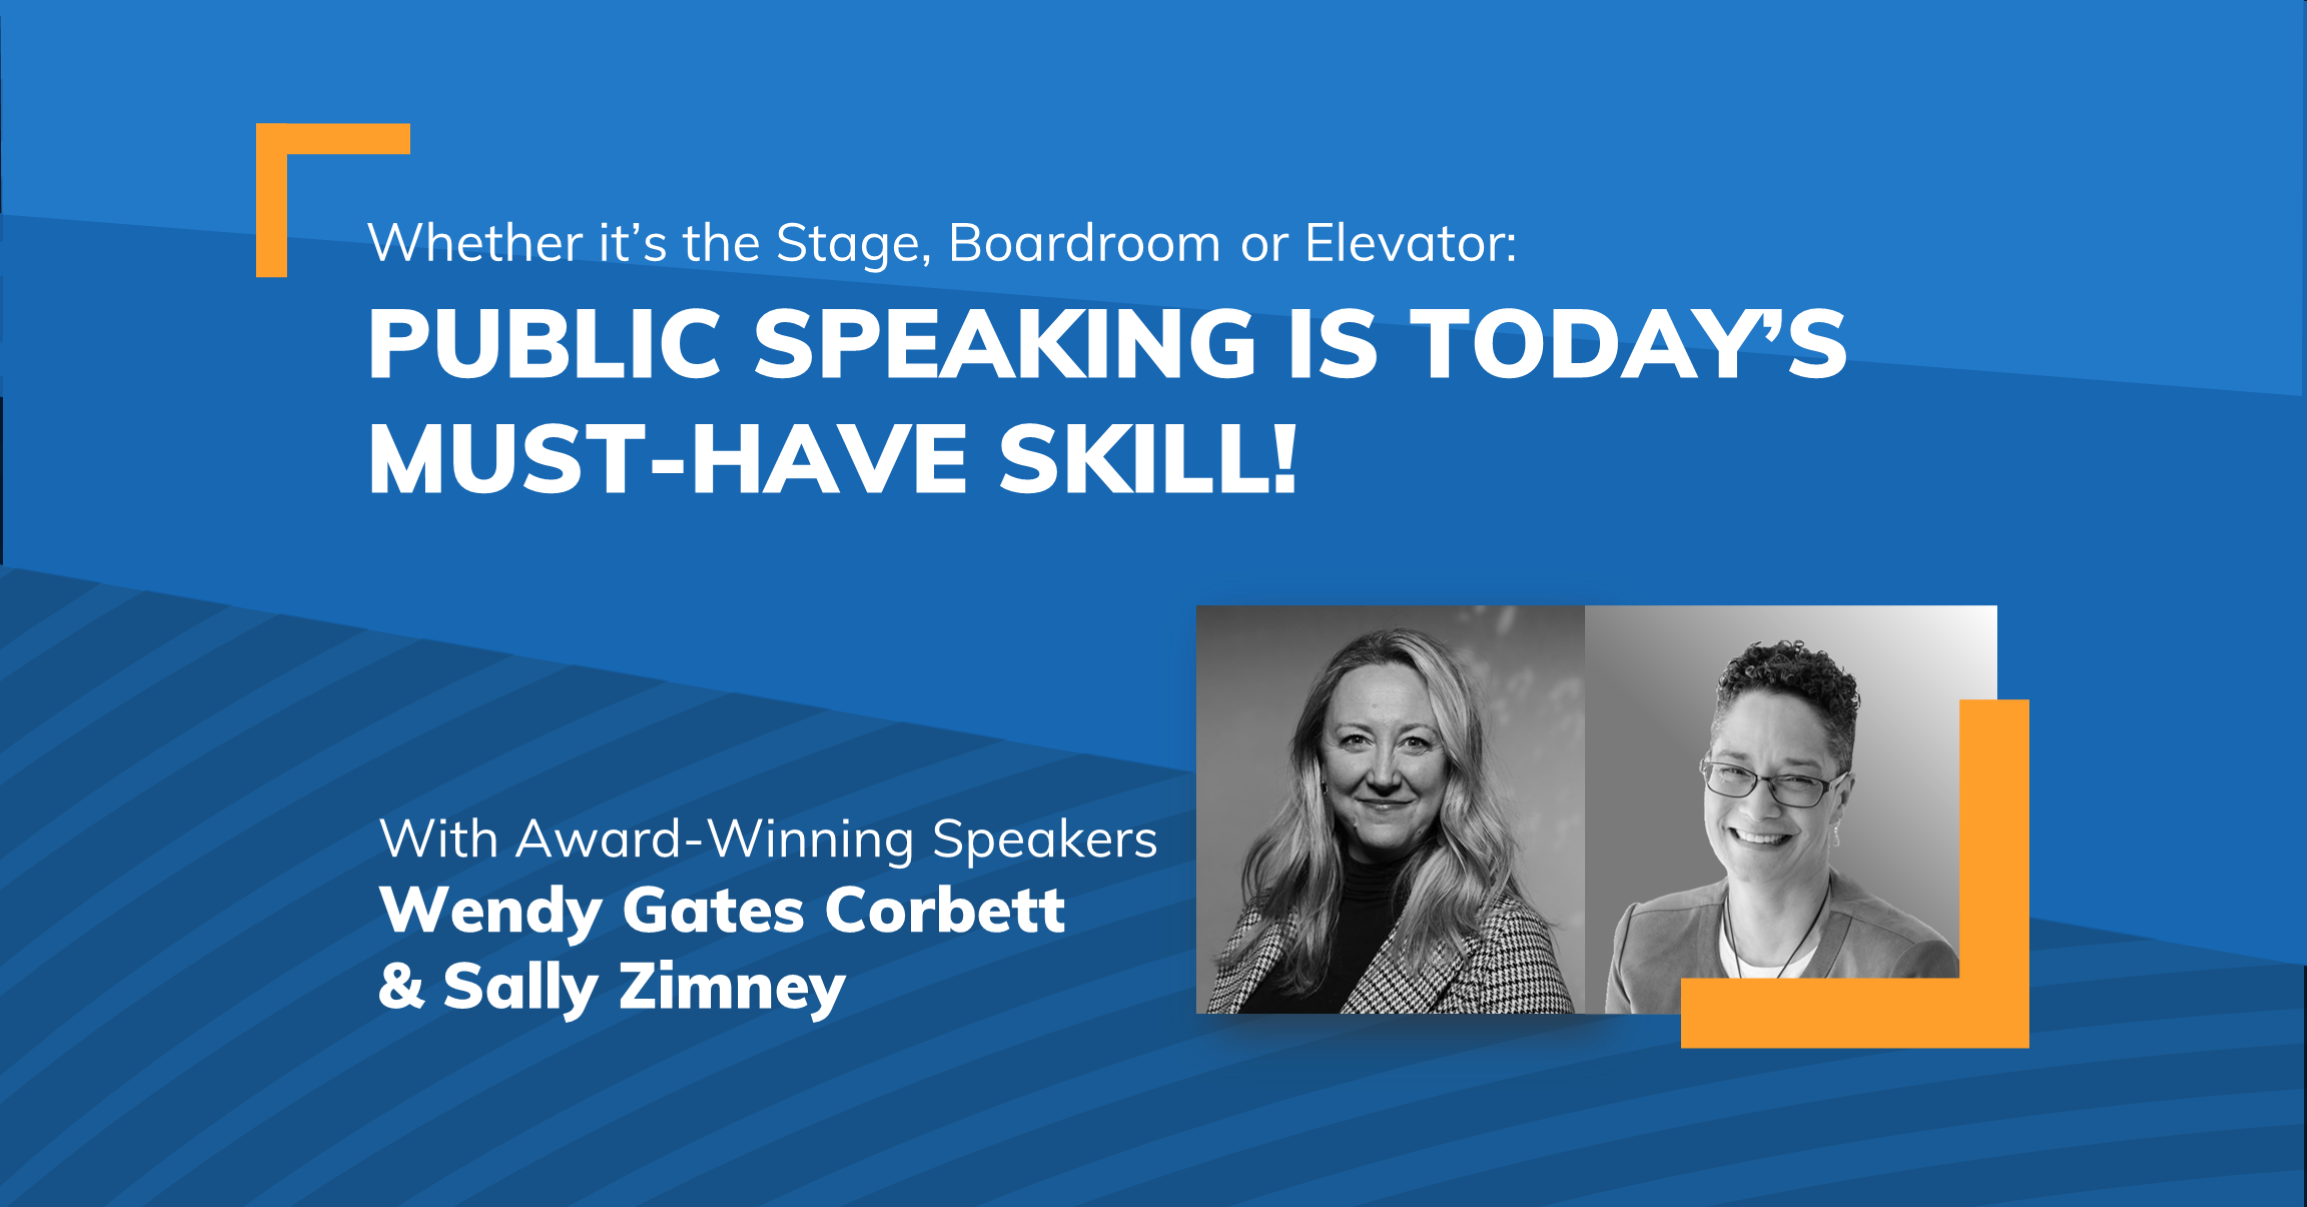 Whether it’s the Stage, Boardroom, or Elevator: Public Speaking is Today’s Must-Have Skill!